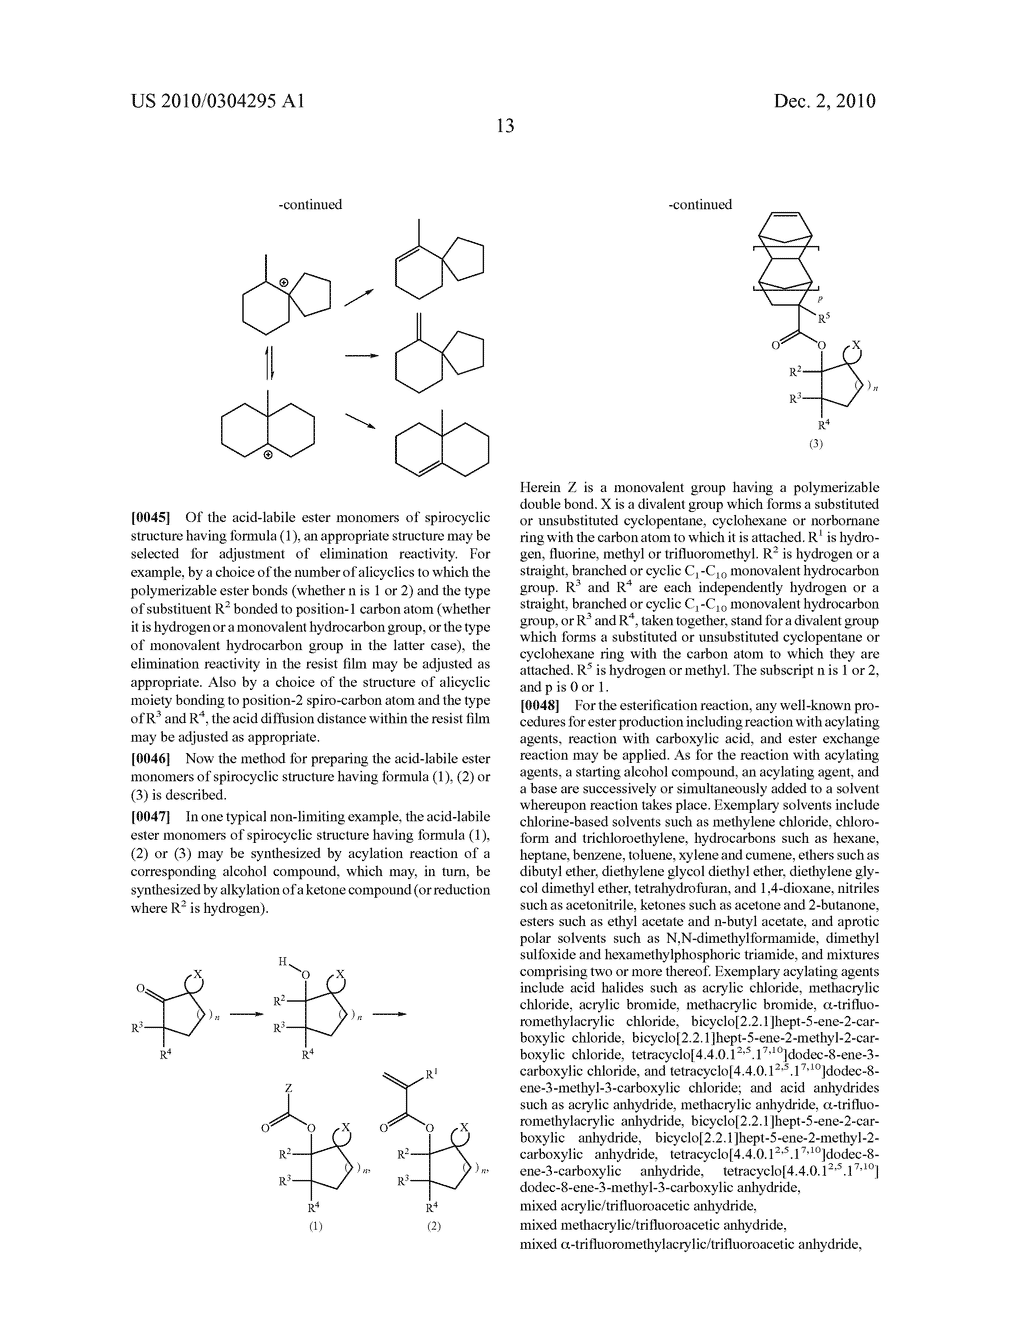 ACID-LABILE ESTER MONOMER HAVING SPIROCYCLIC STRUCTURE, POLYMER, RESIST COMPOSITION, AND PATTERNING PROCESS - diagram, schematic, and image 14